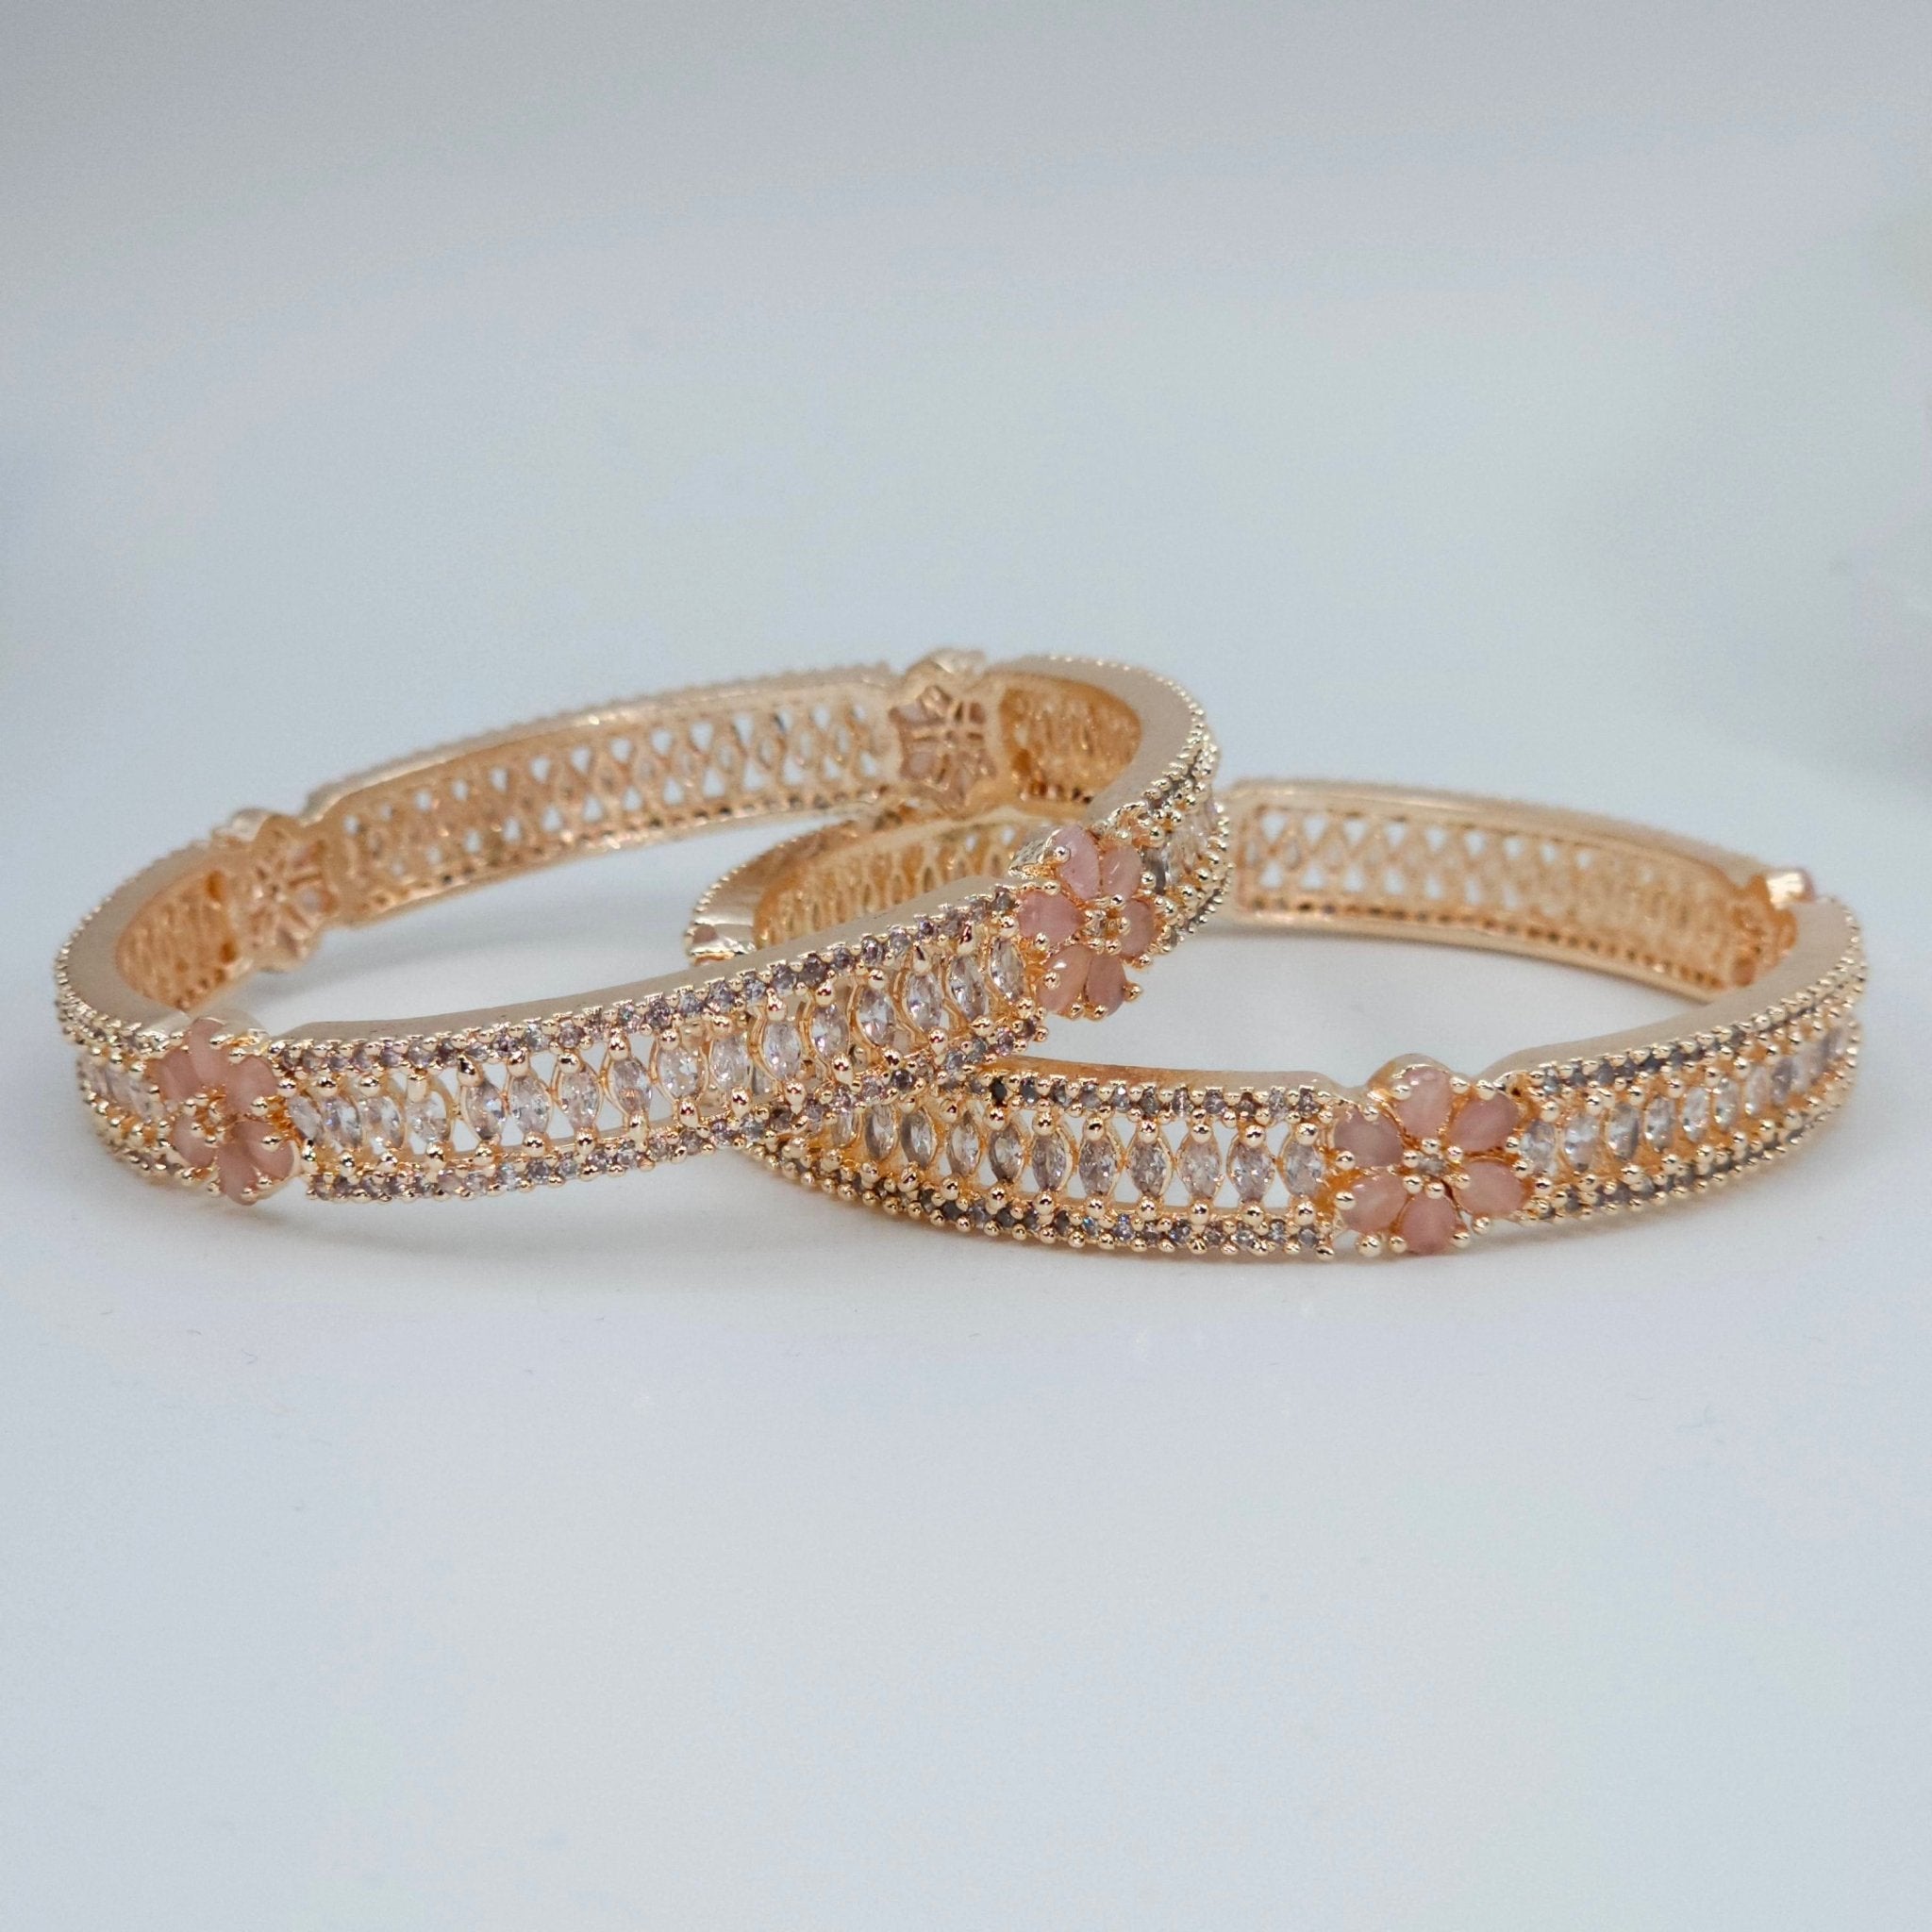 Pair of Rose Gold Bangles - Pink - Fancy Fab Jewels